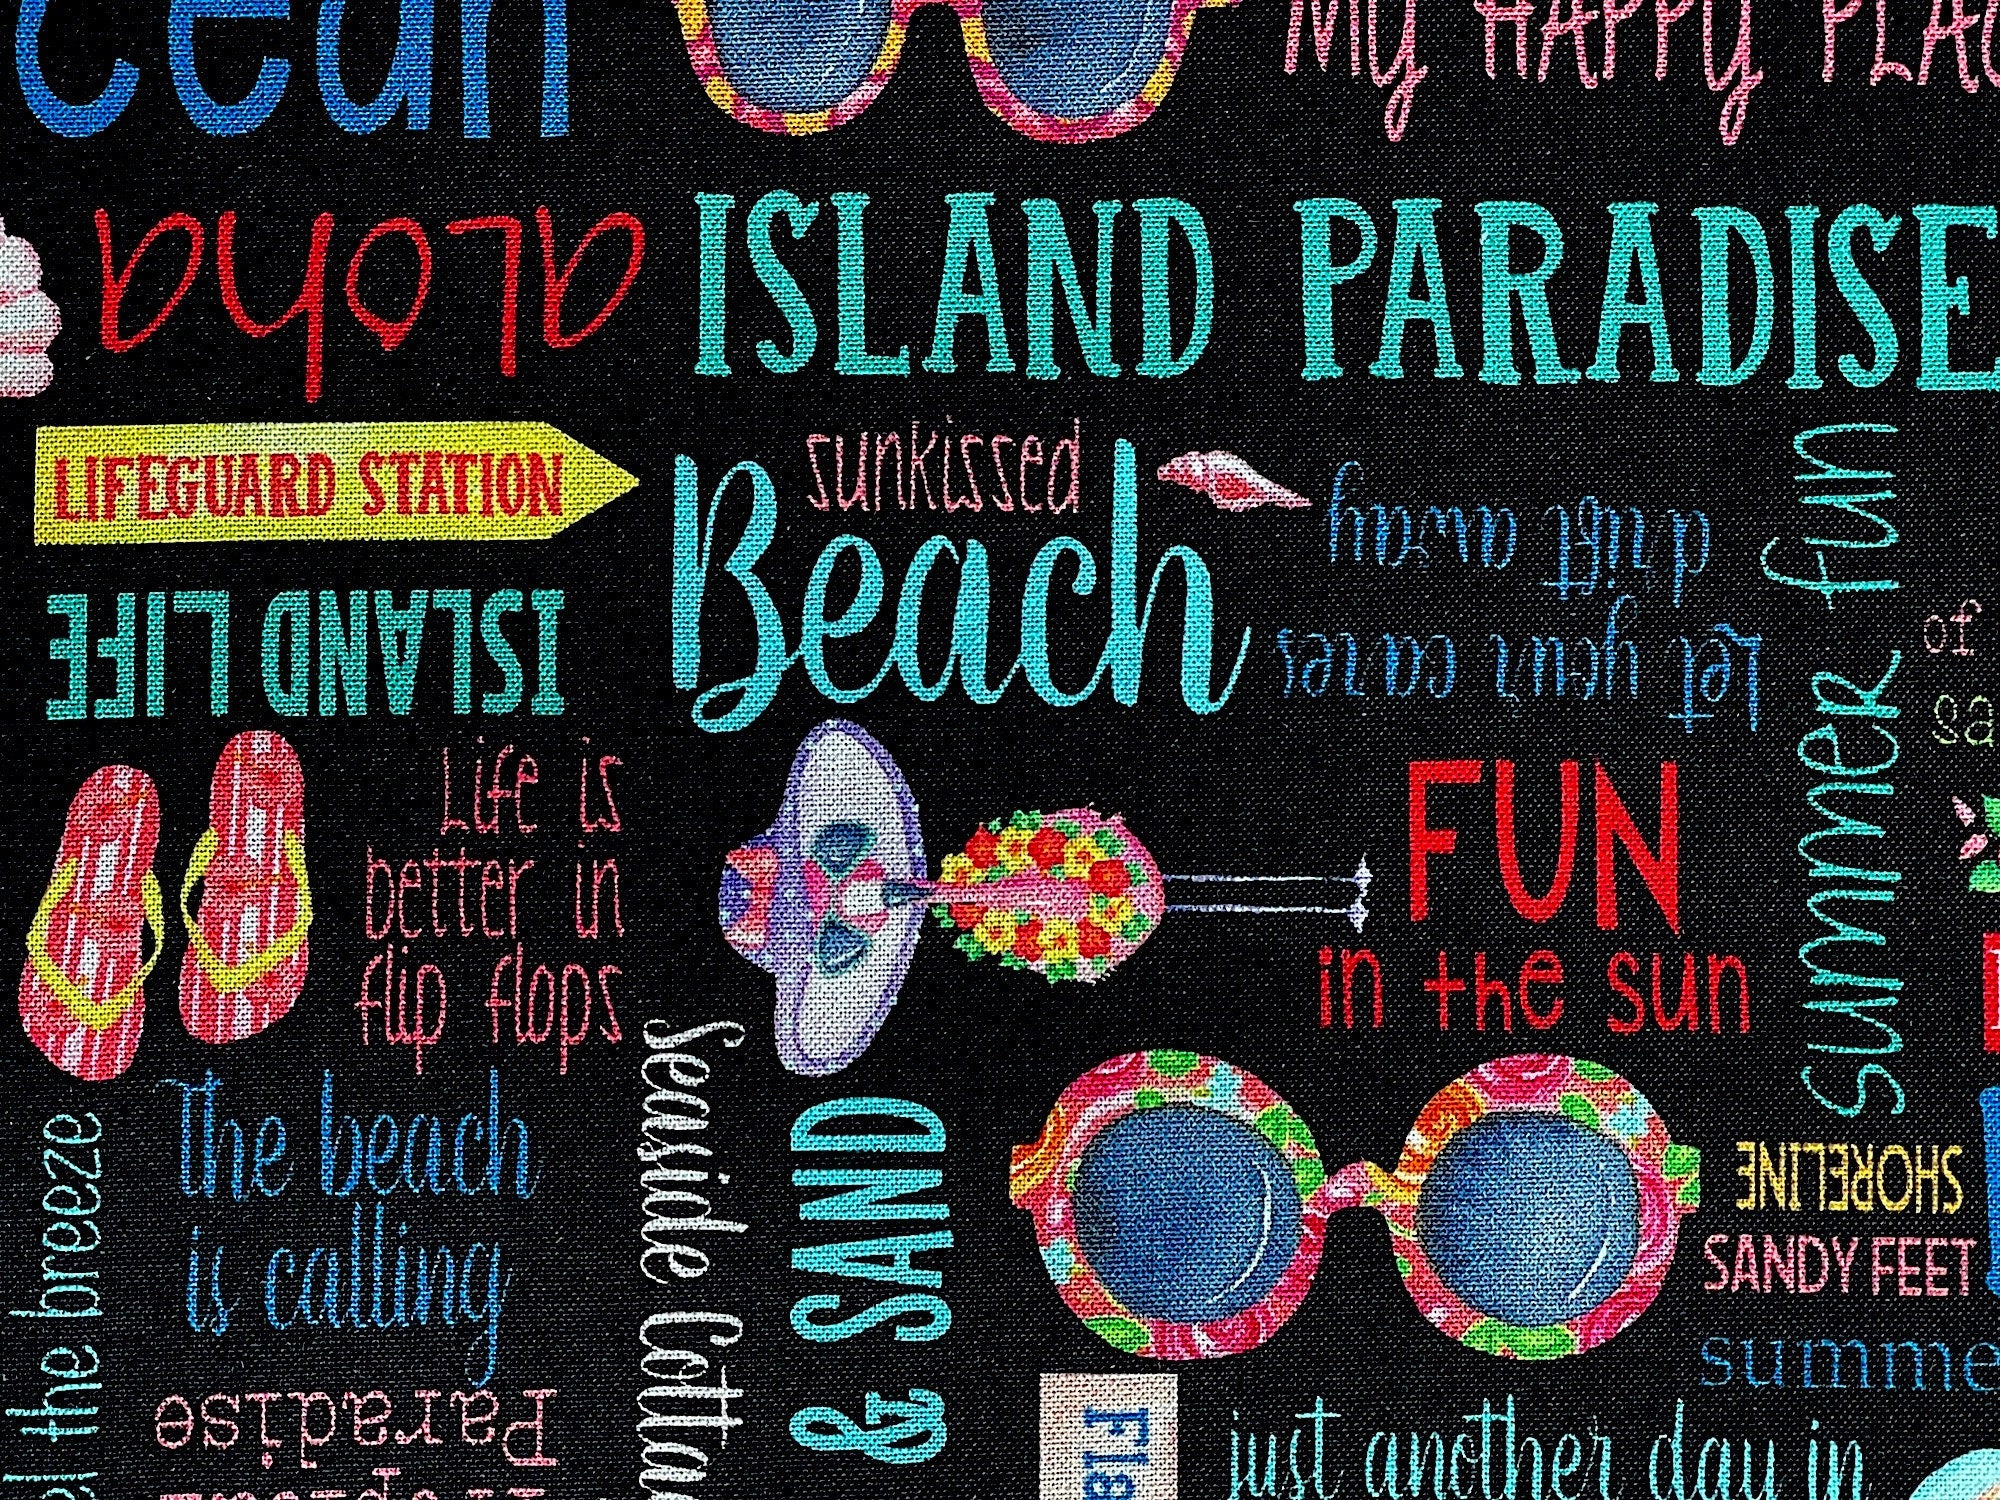 Close up of sayings such as island paradise, beach, fun in the sun and more.